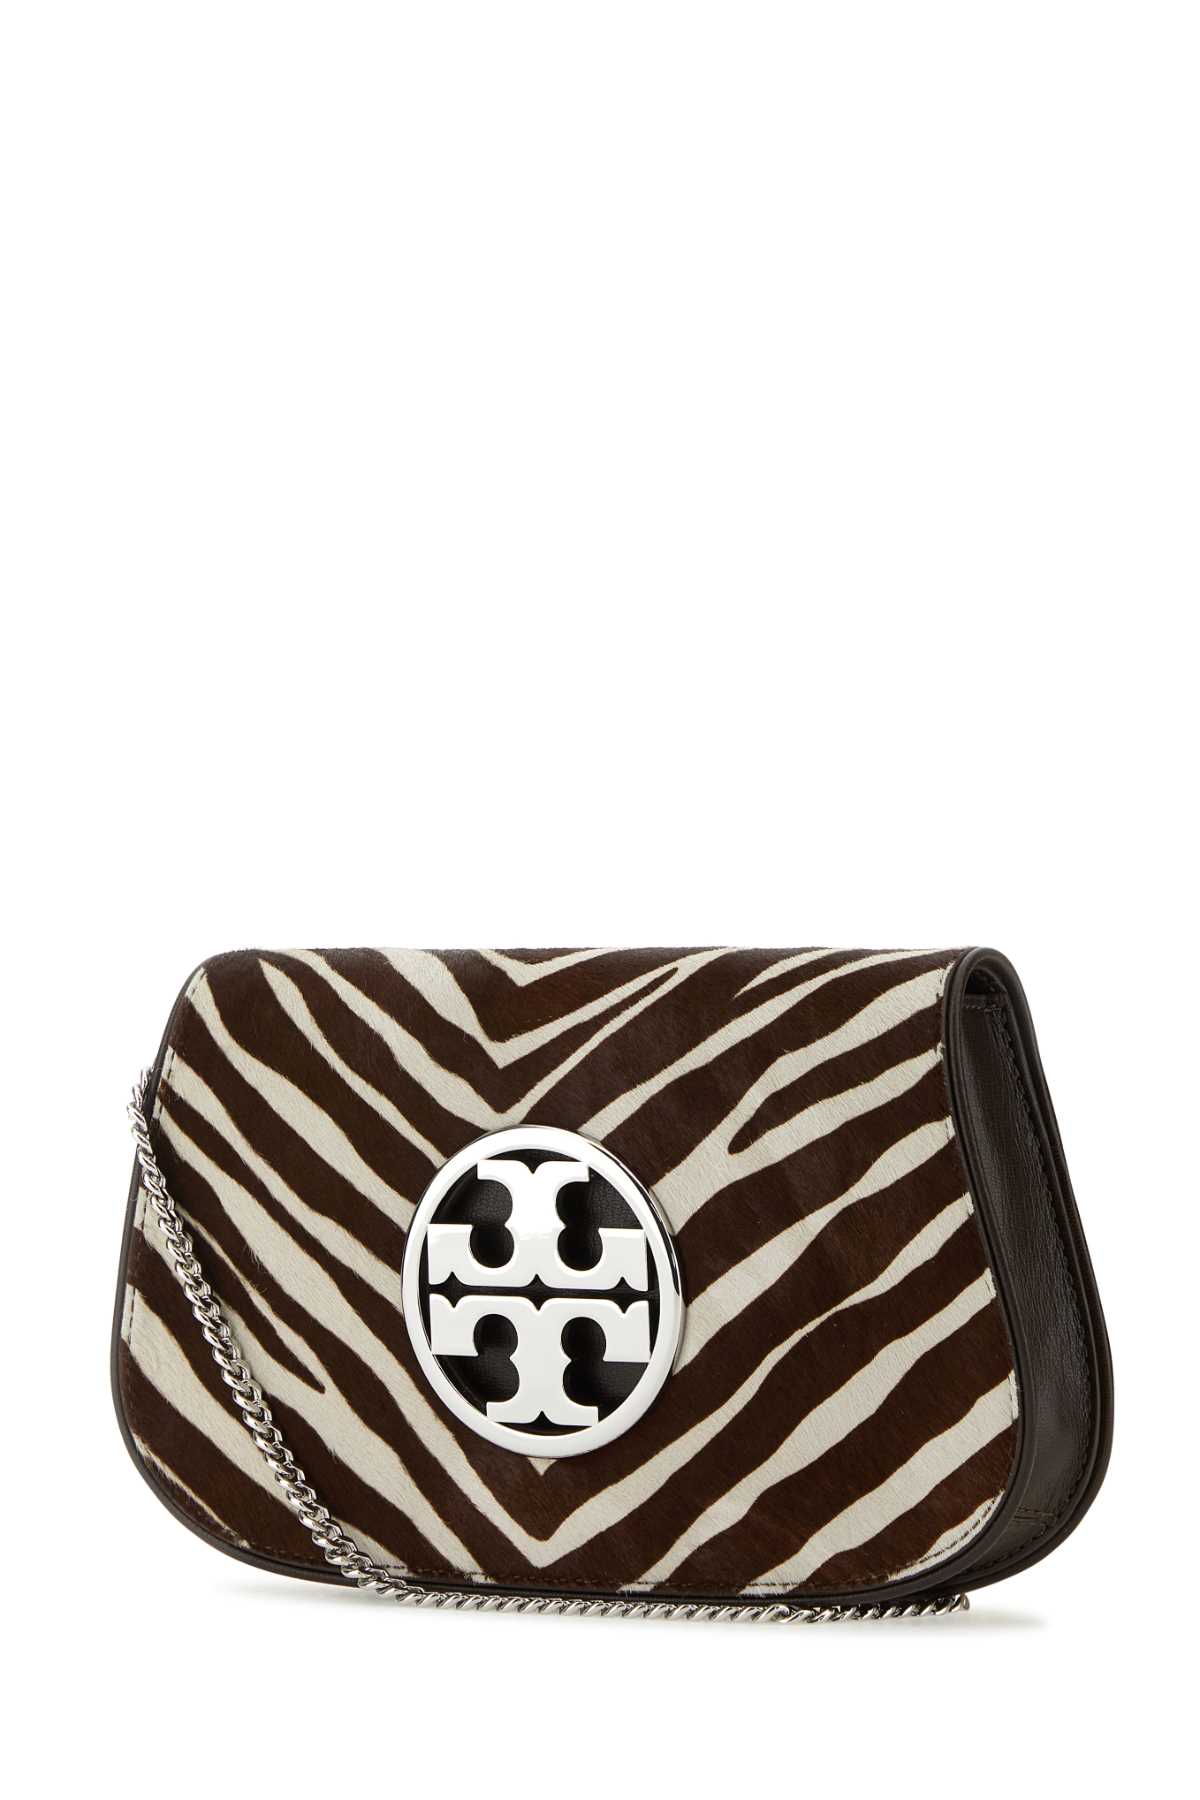 Tory Burch Printed Calfhair And Leather Shoulder Bag In Multi